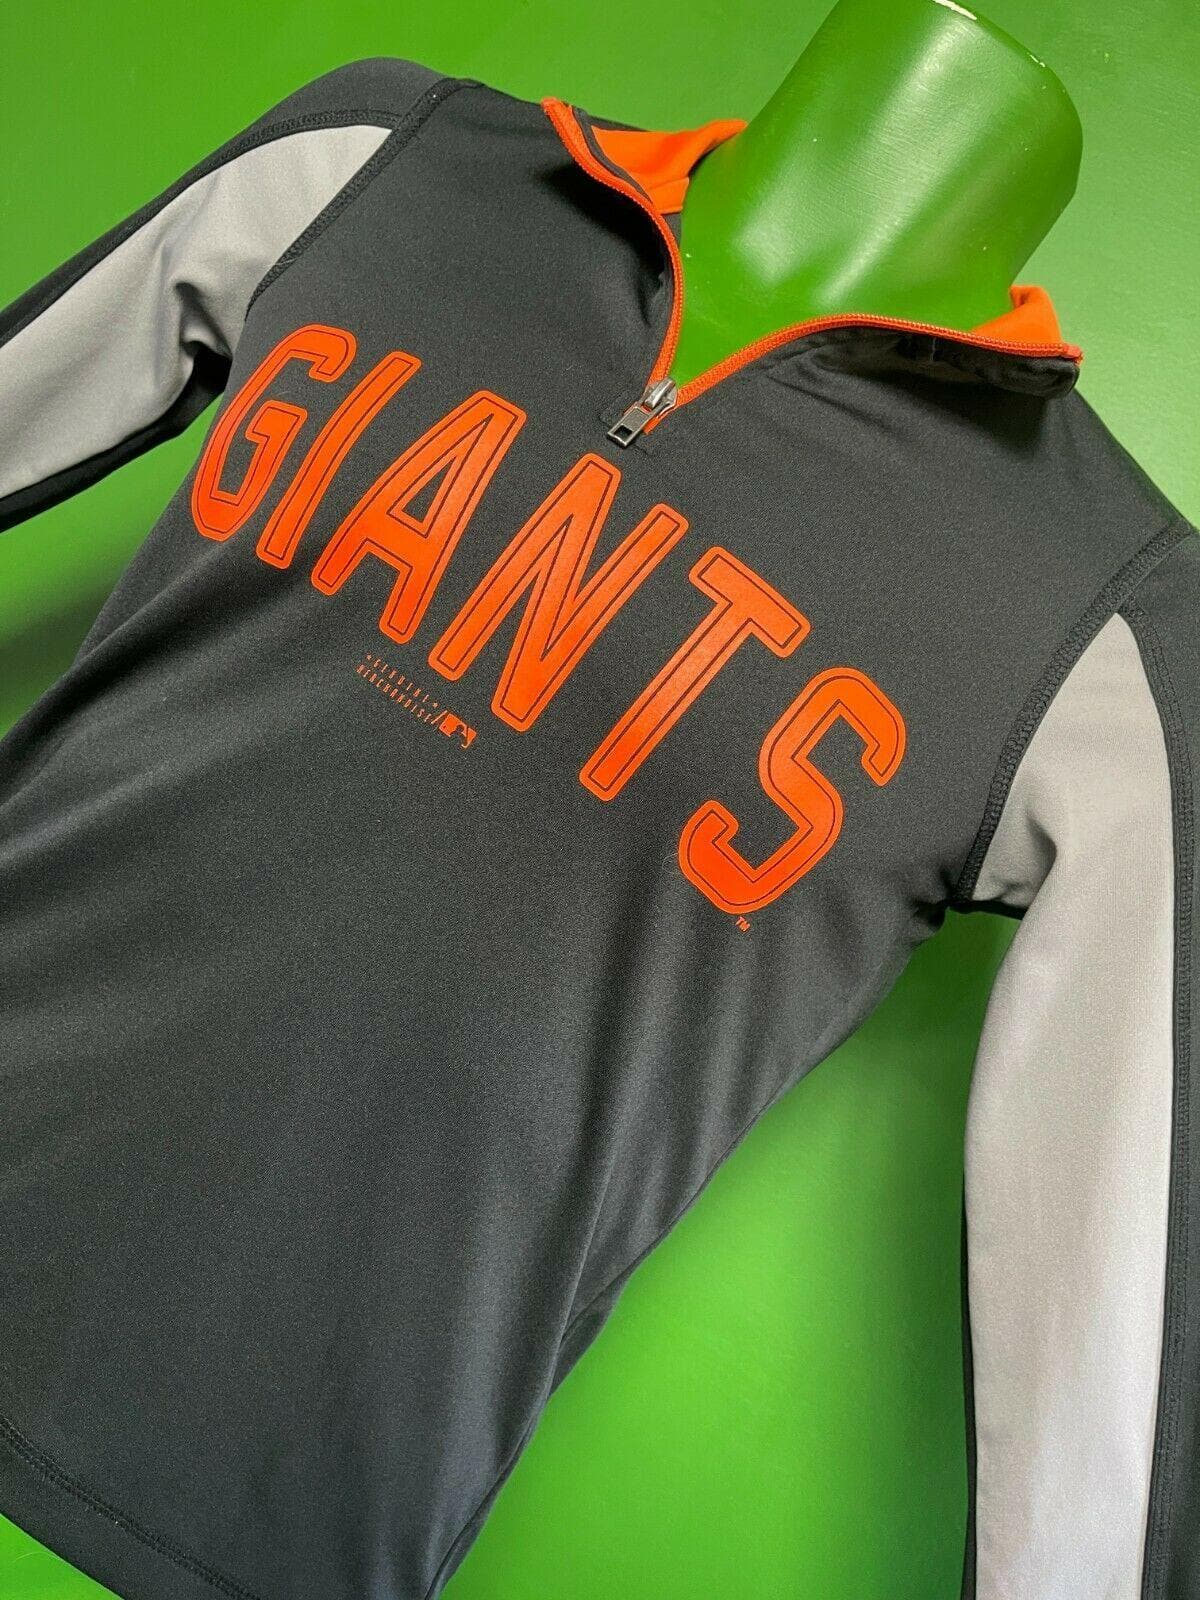 MLB San Francisco Giants Team Athletics 1-4 Zip Pullover Youth Small 8